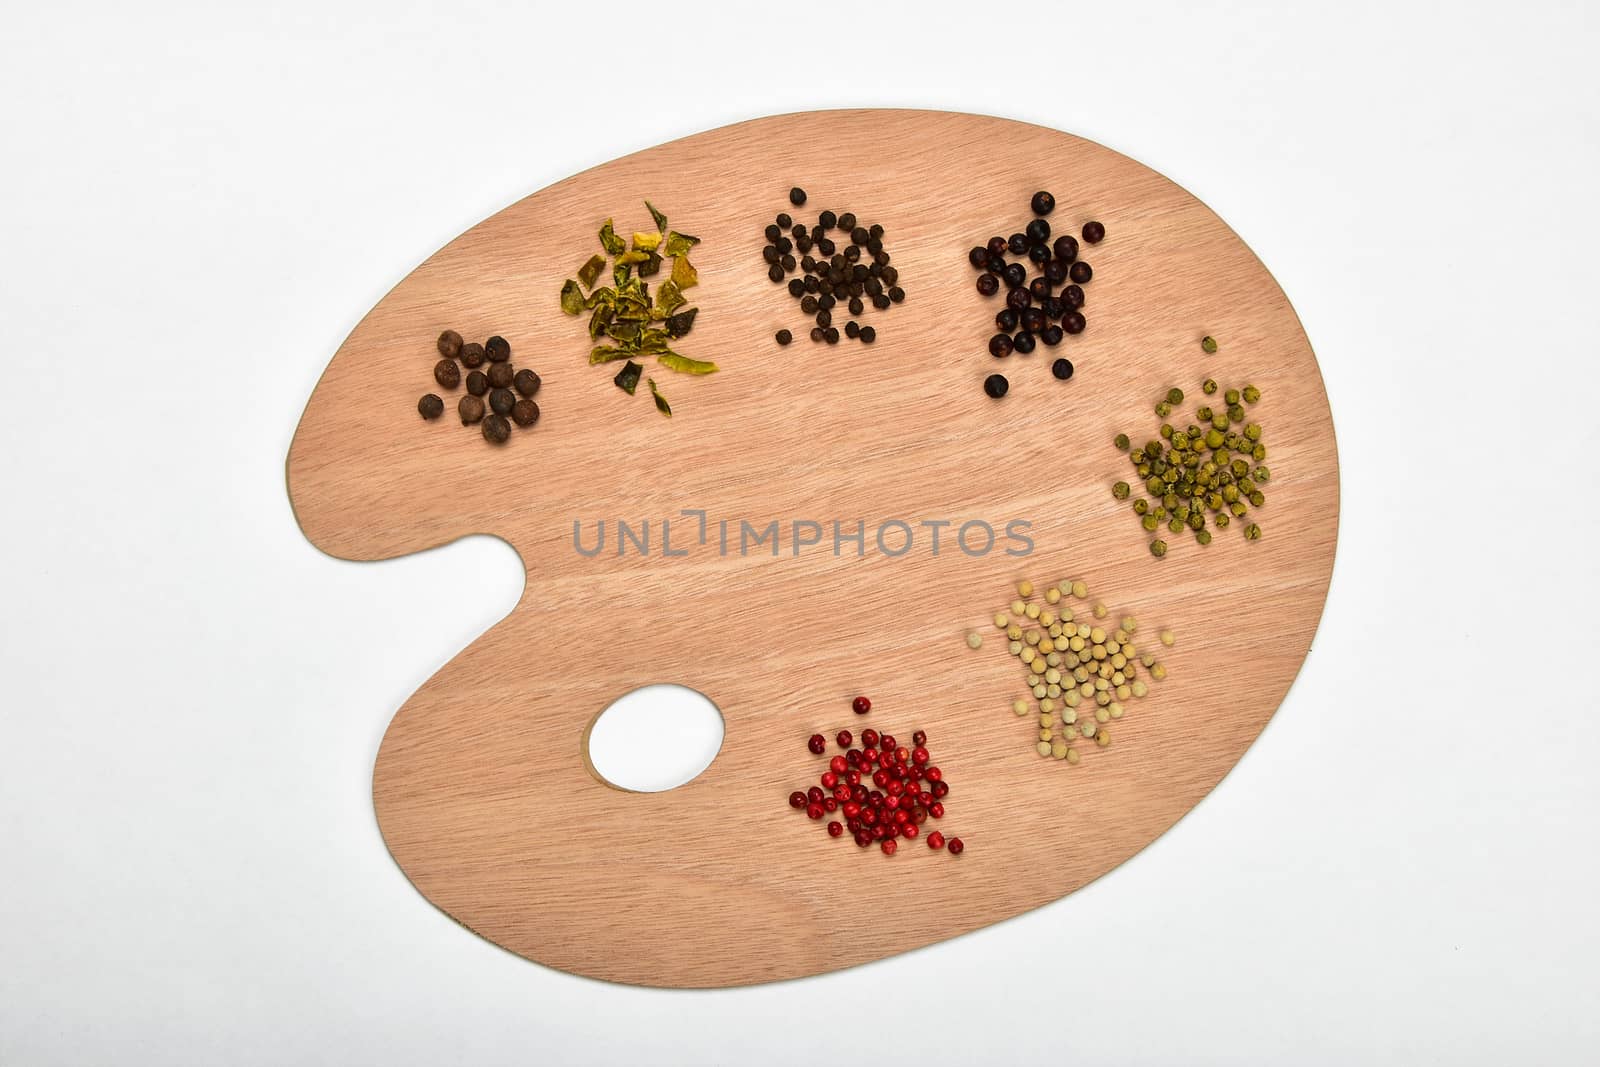 Palette of spices, collection of various spices on wooden palette isolated on white